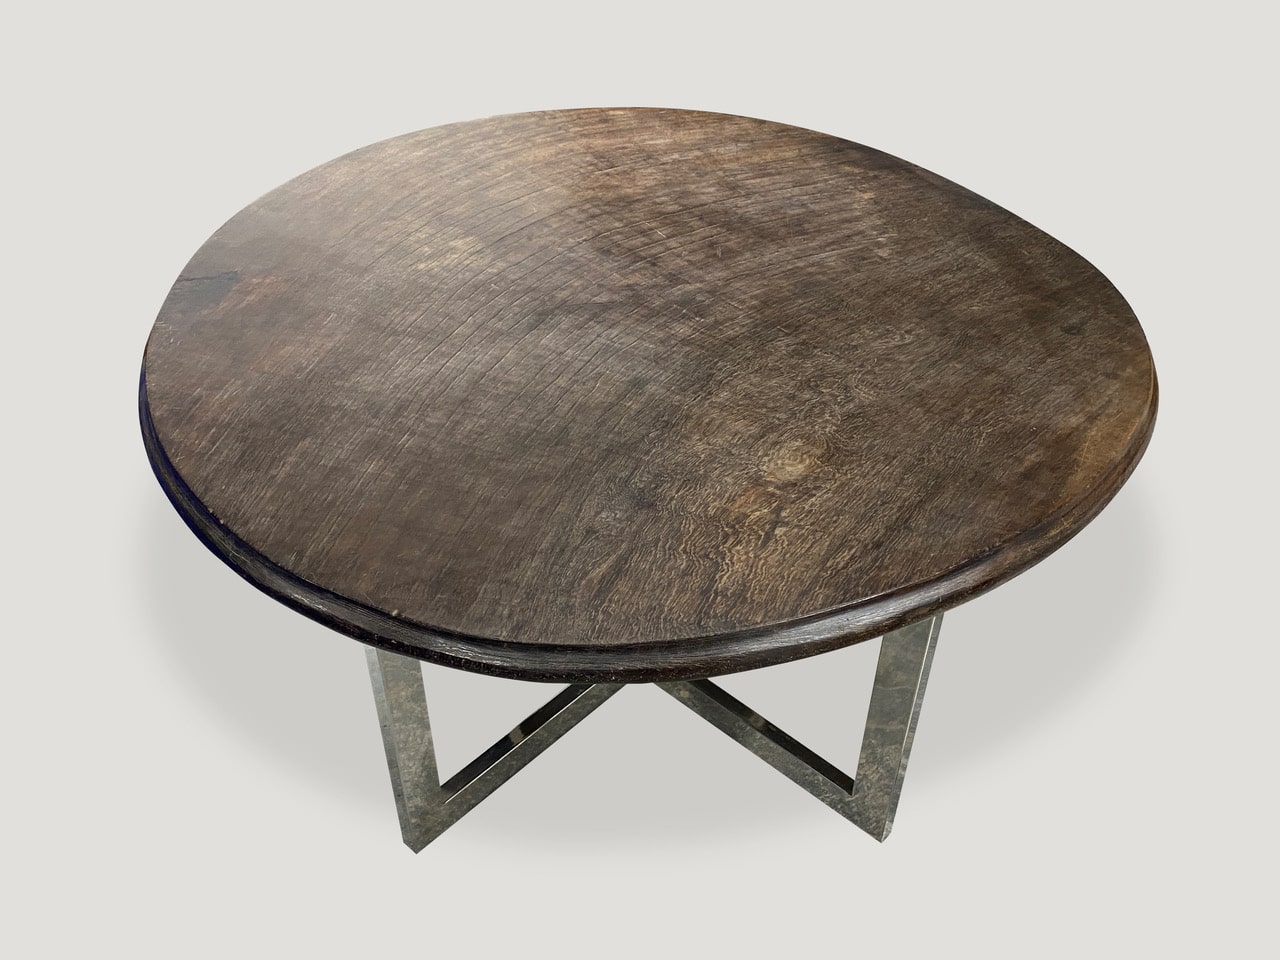 Ulin wood cocktail table